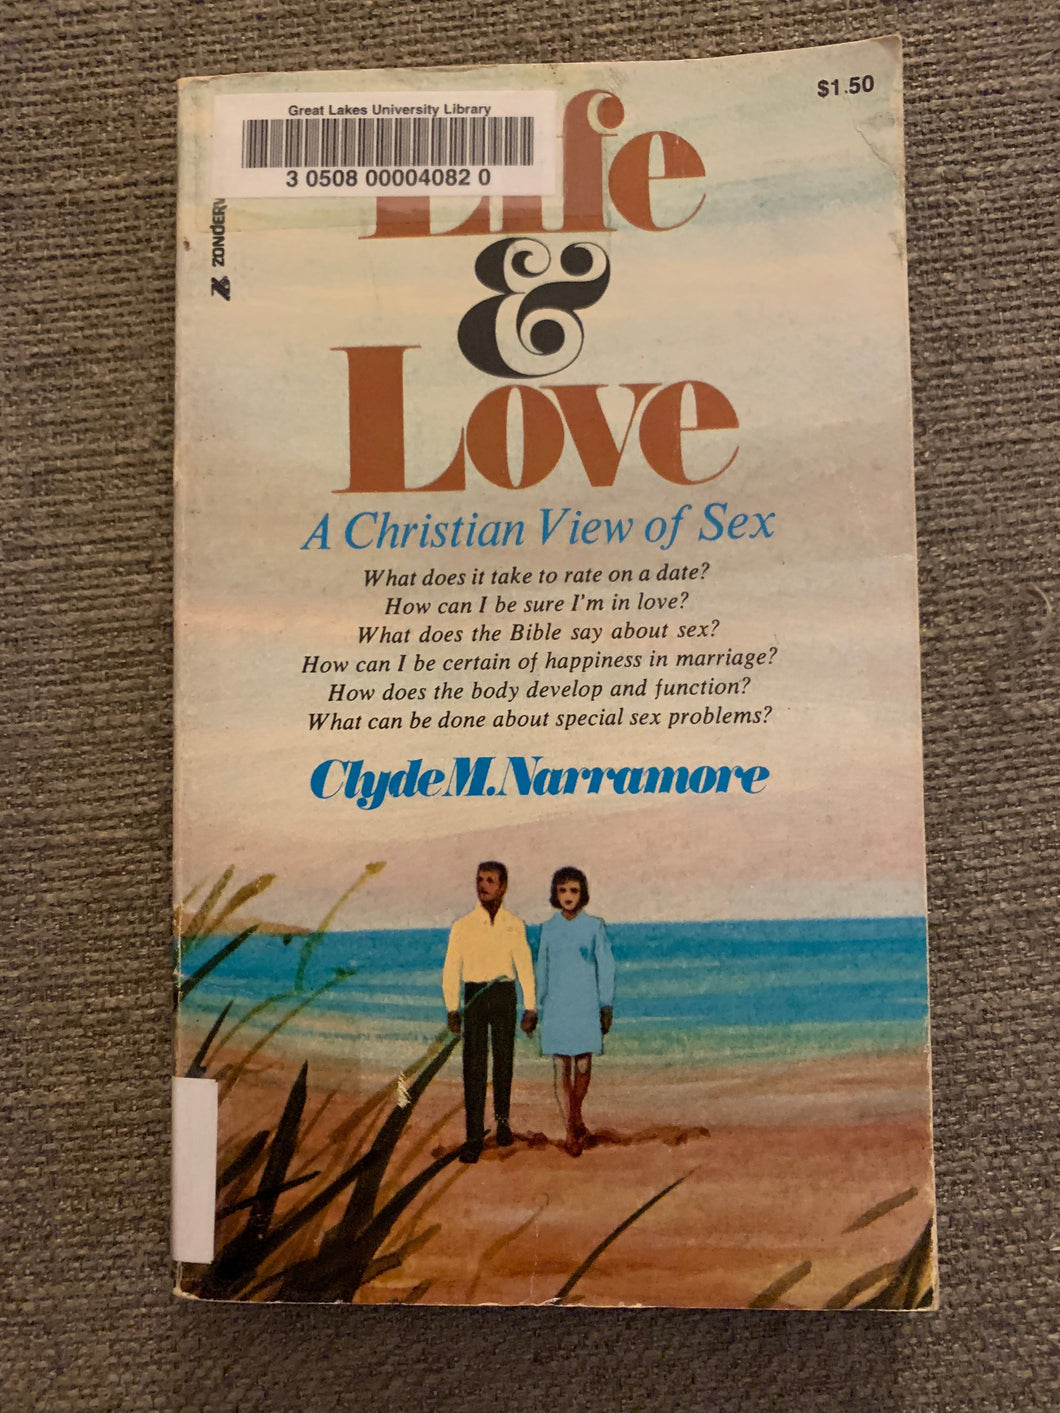 Life & Love: A Christian View of Sex by Clyde M. Narramore